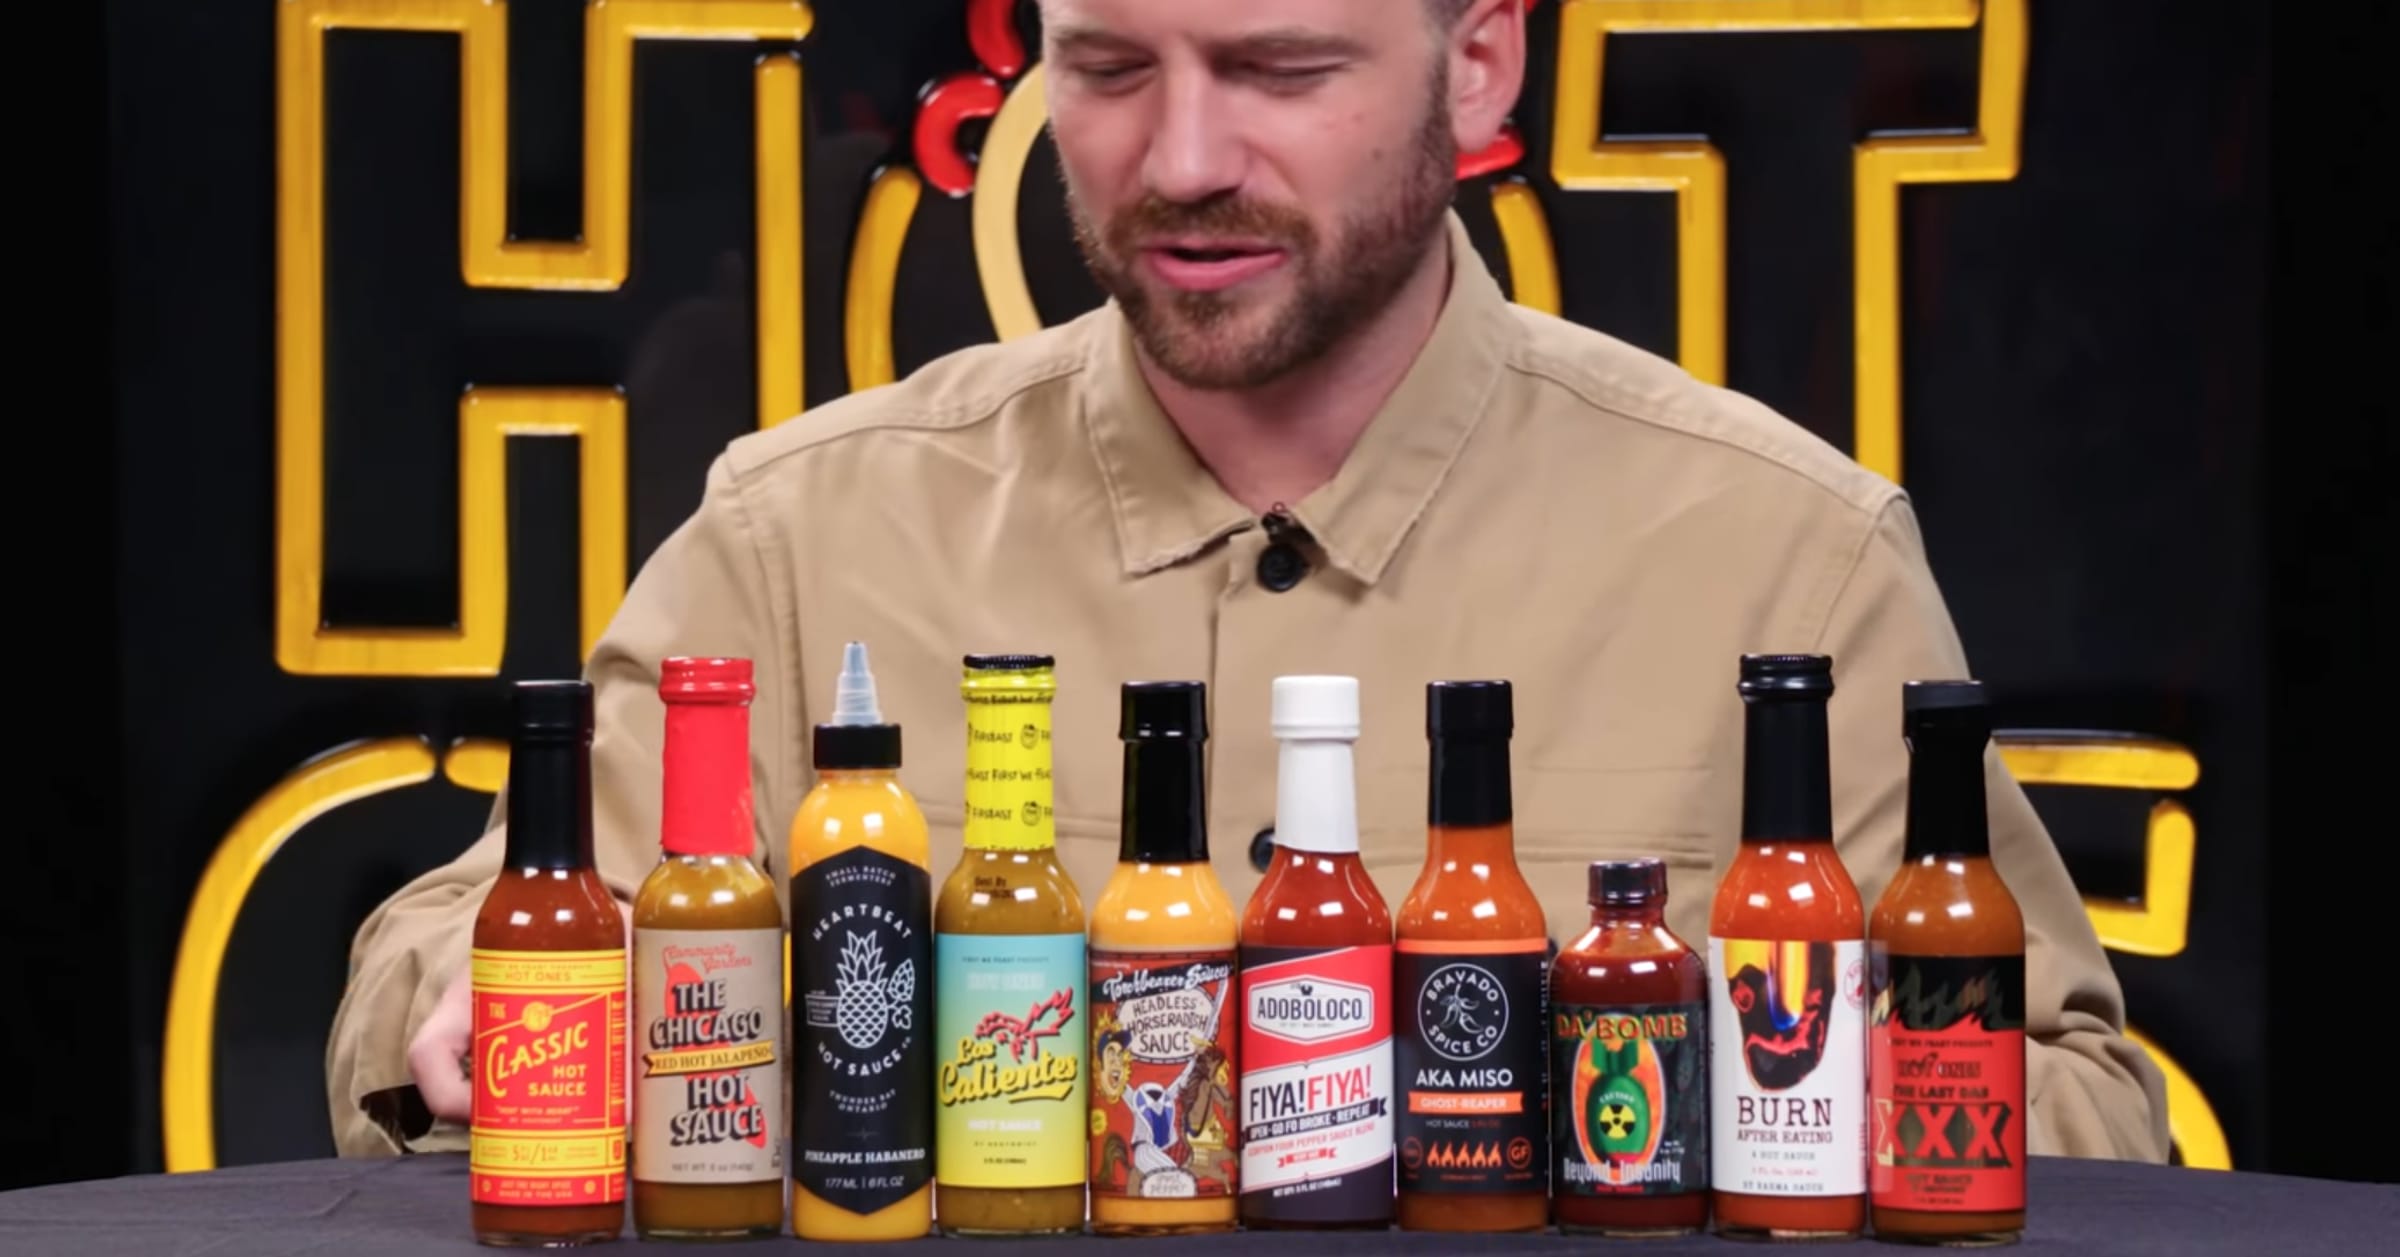 Every Hot Sauce On Hot Ones From The Classic To The Last Dab, Ranked By  Scoville